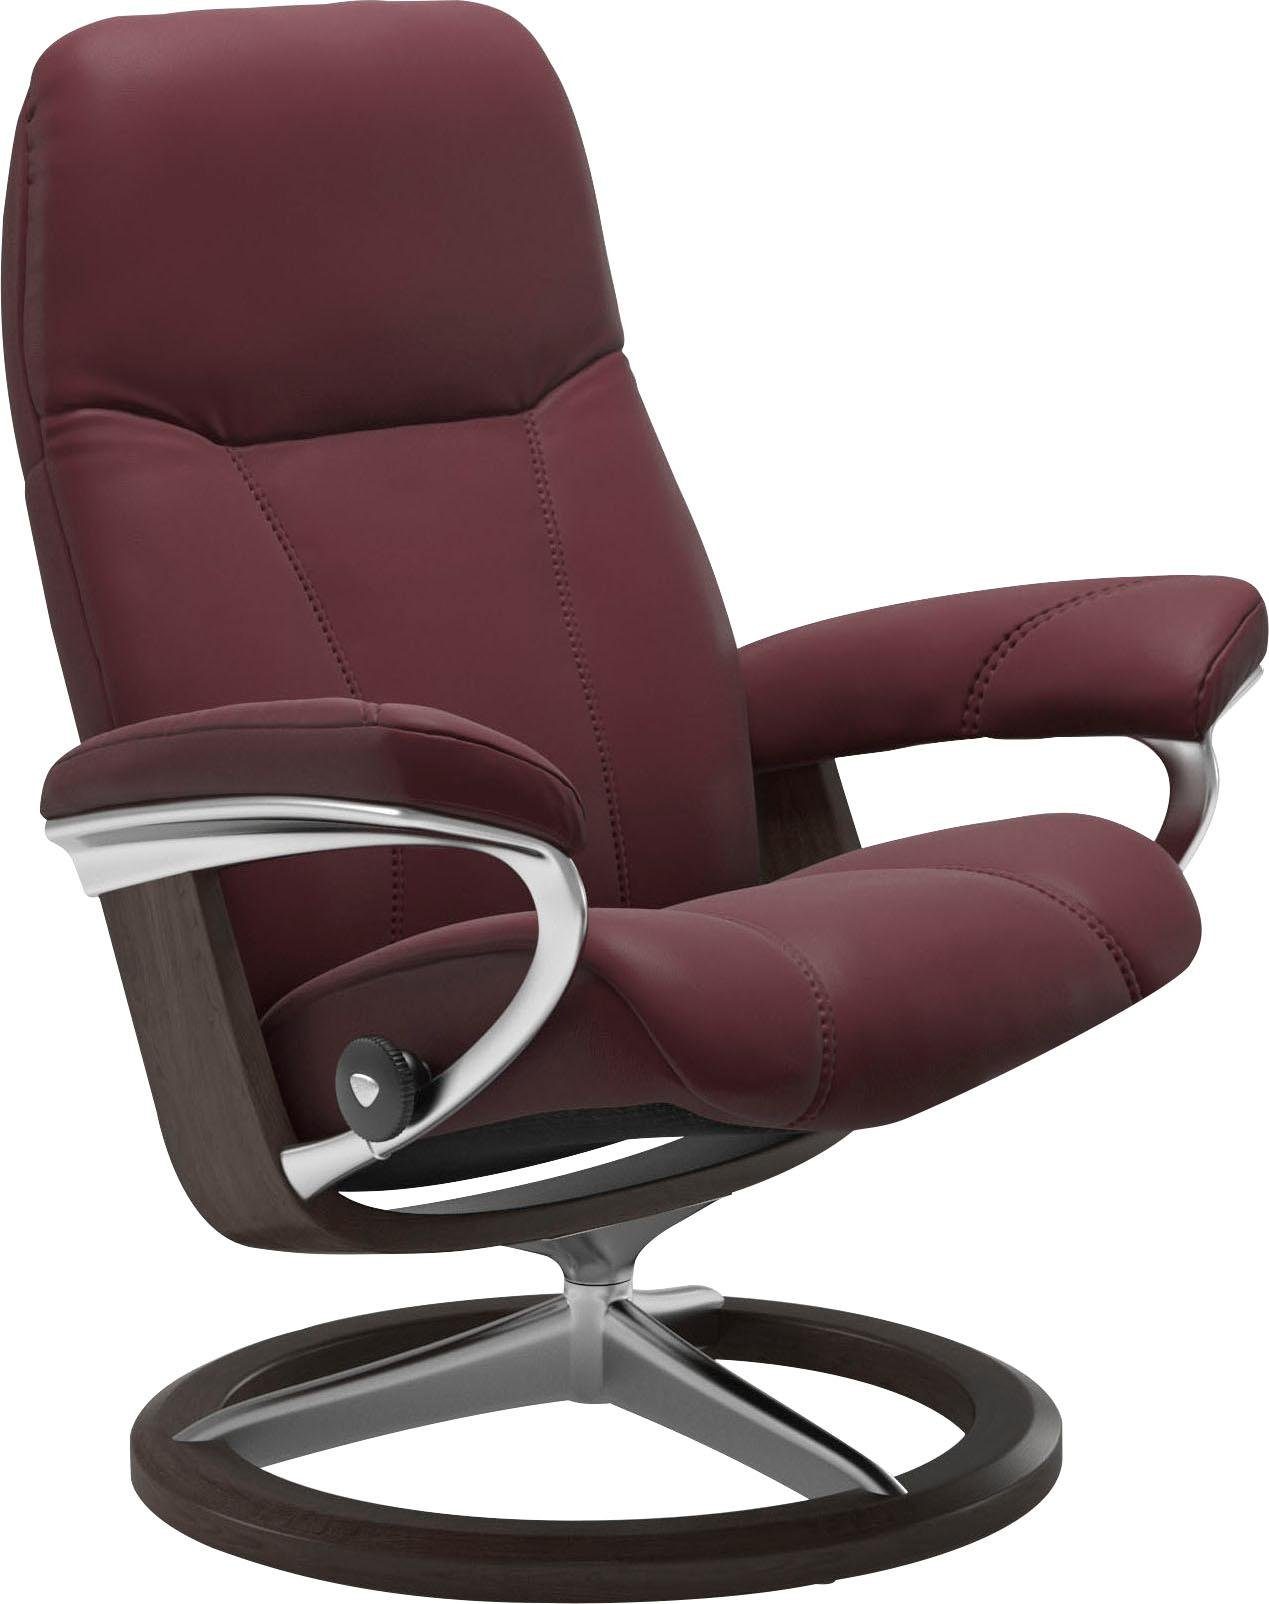 Stressless® Relaxsessel Consul, mit Signature Base, Größe S, Gestell Wenge | Funktionssessel